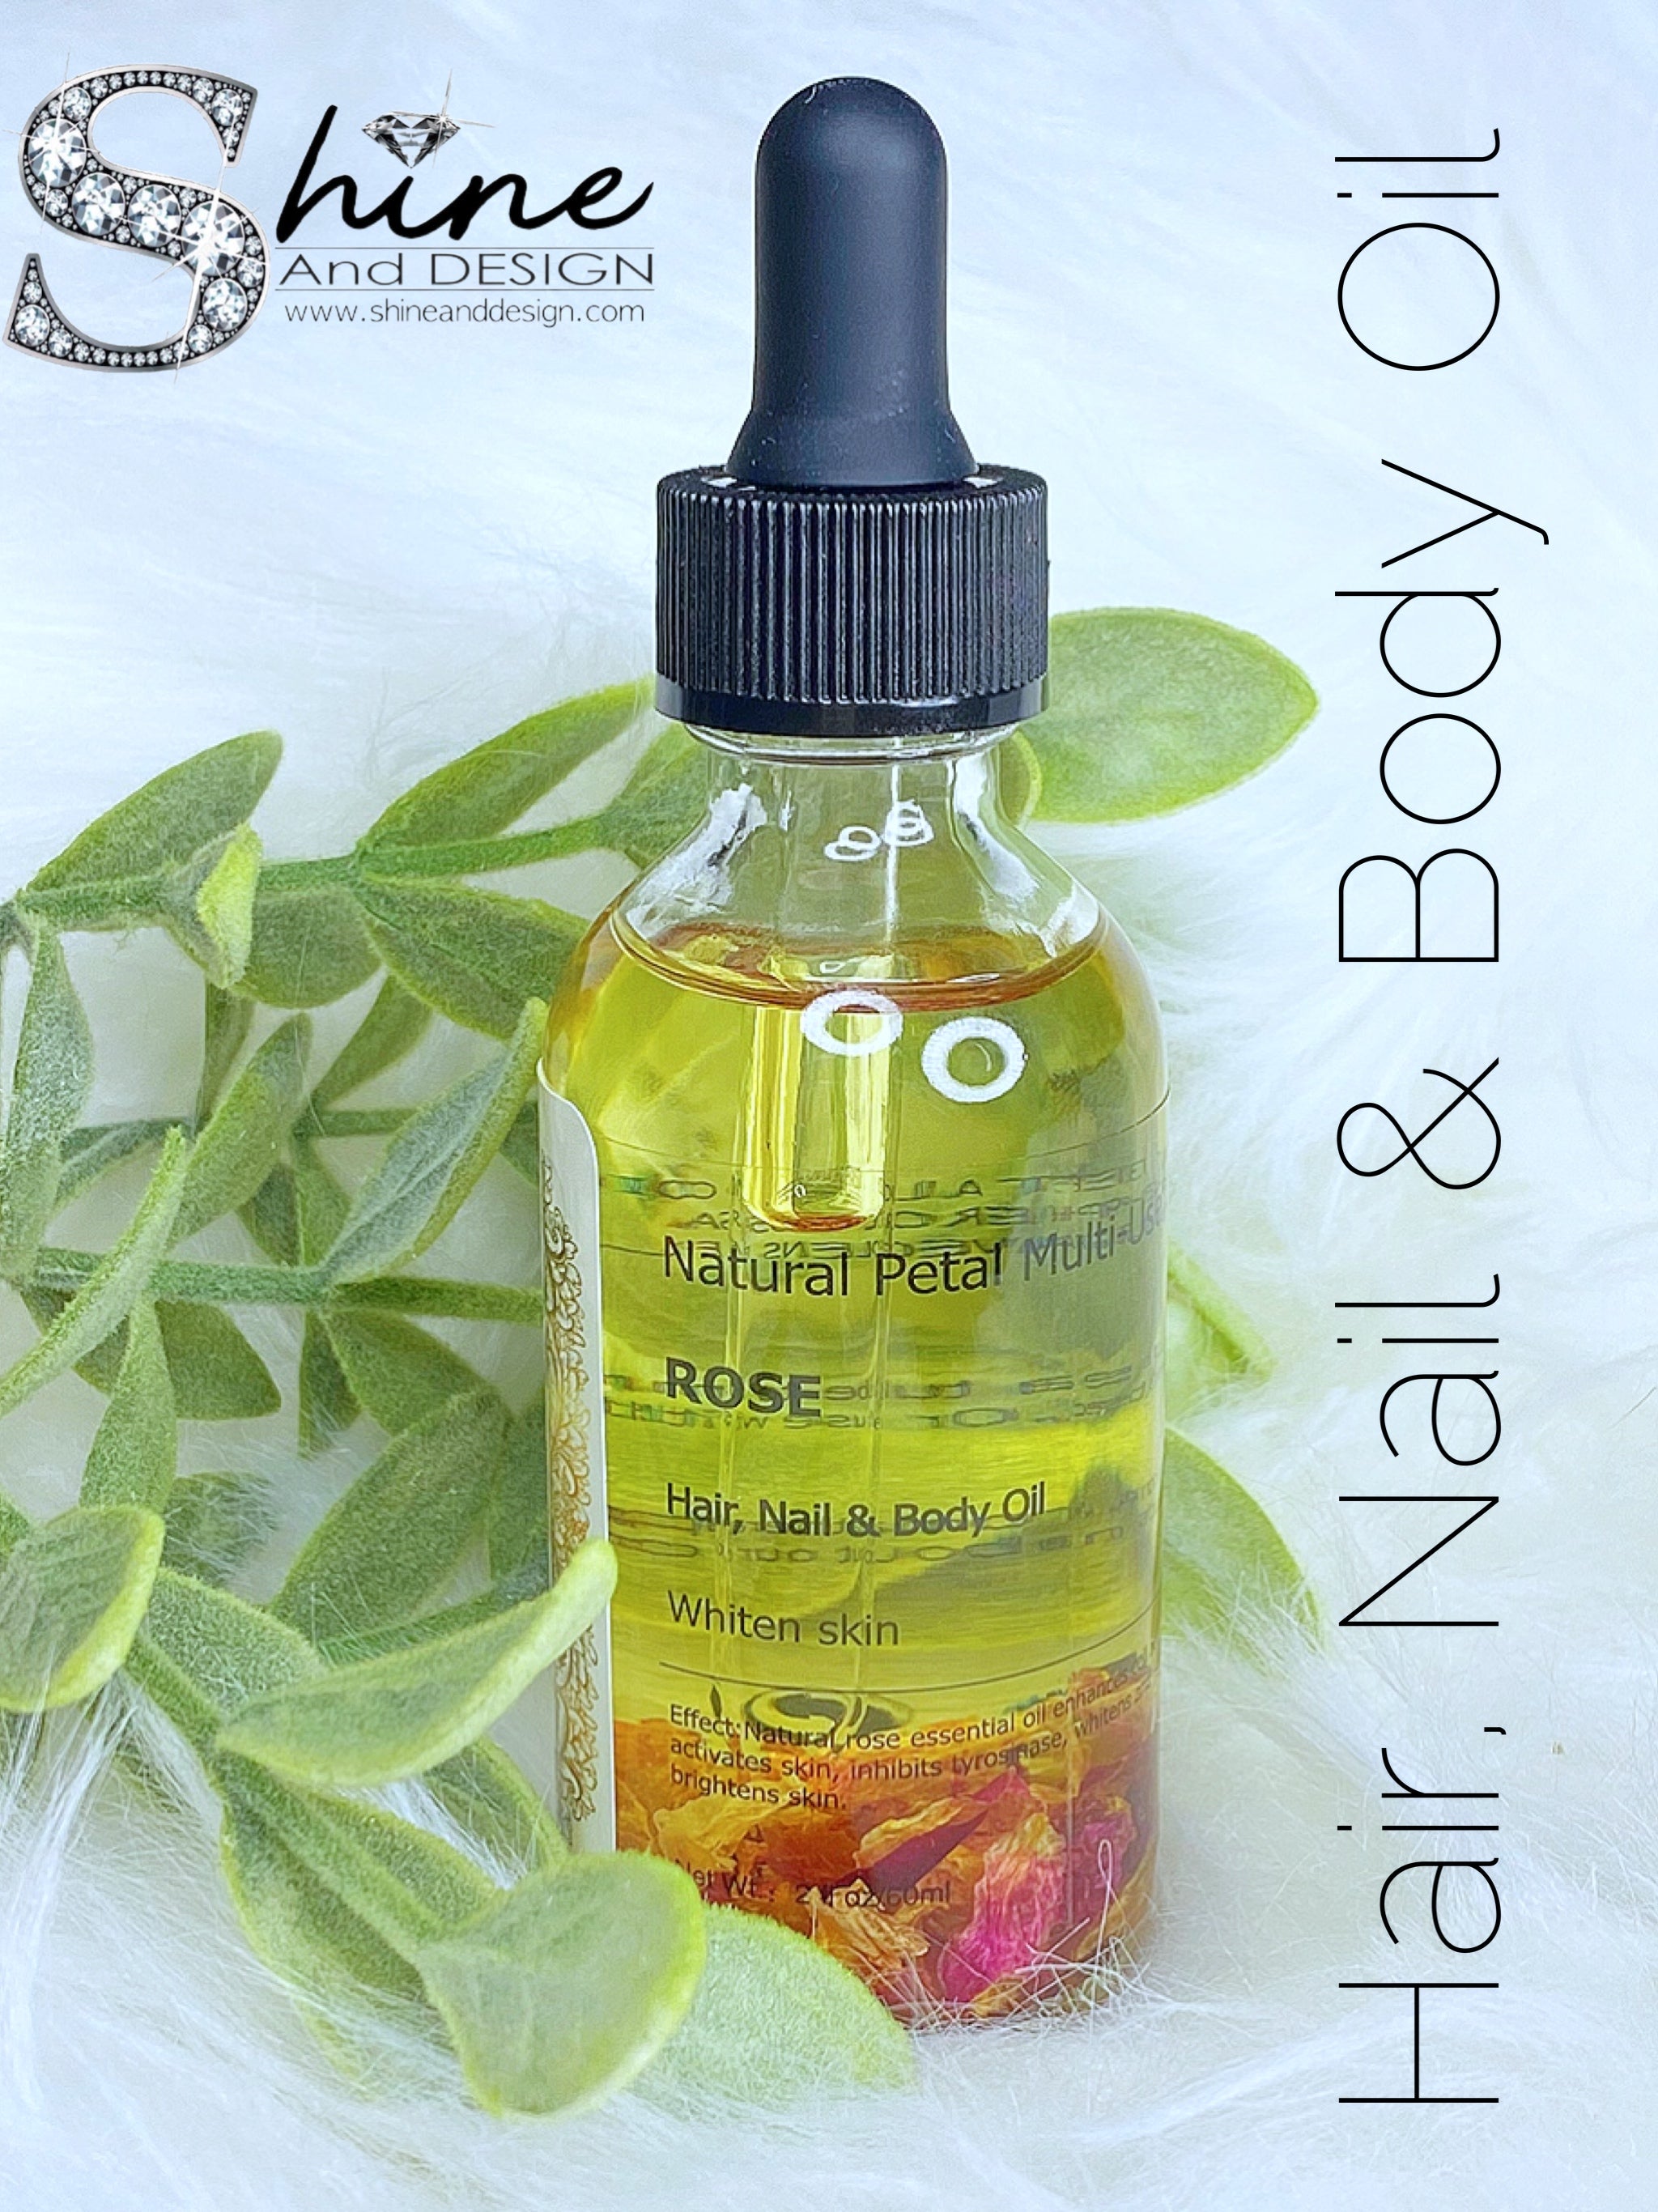 SHINE - ROSE - Hair, Nail & Body Oil- w/Vitamin E & Essential Extracts